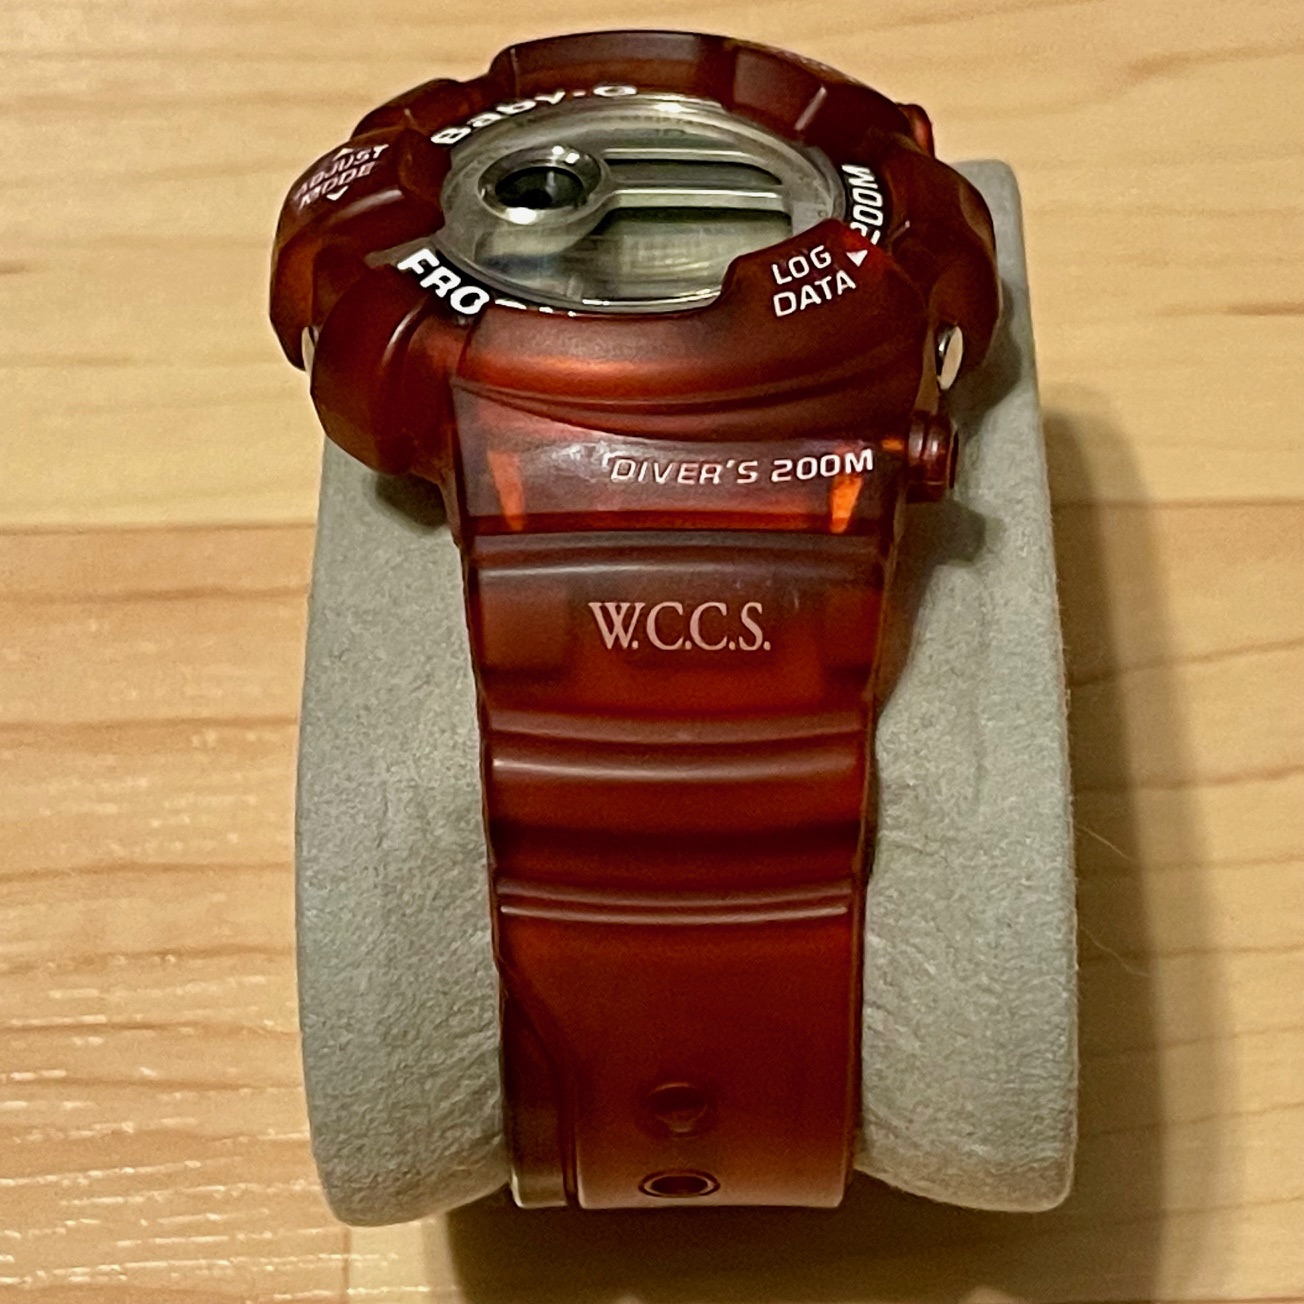 WTS] Casio G-Shock Baby-G Frogman Candy Apple Red Custom Jelly 